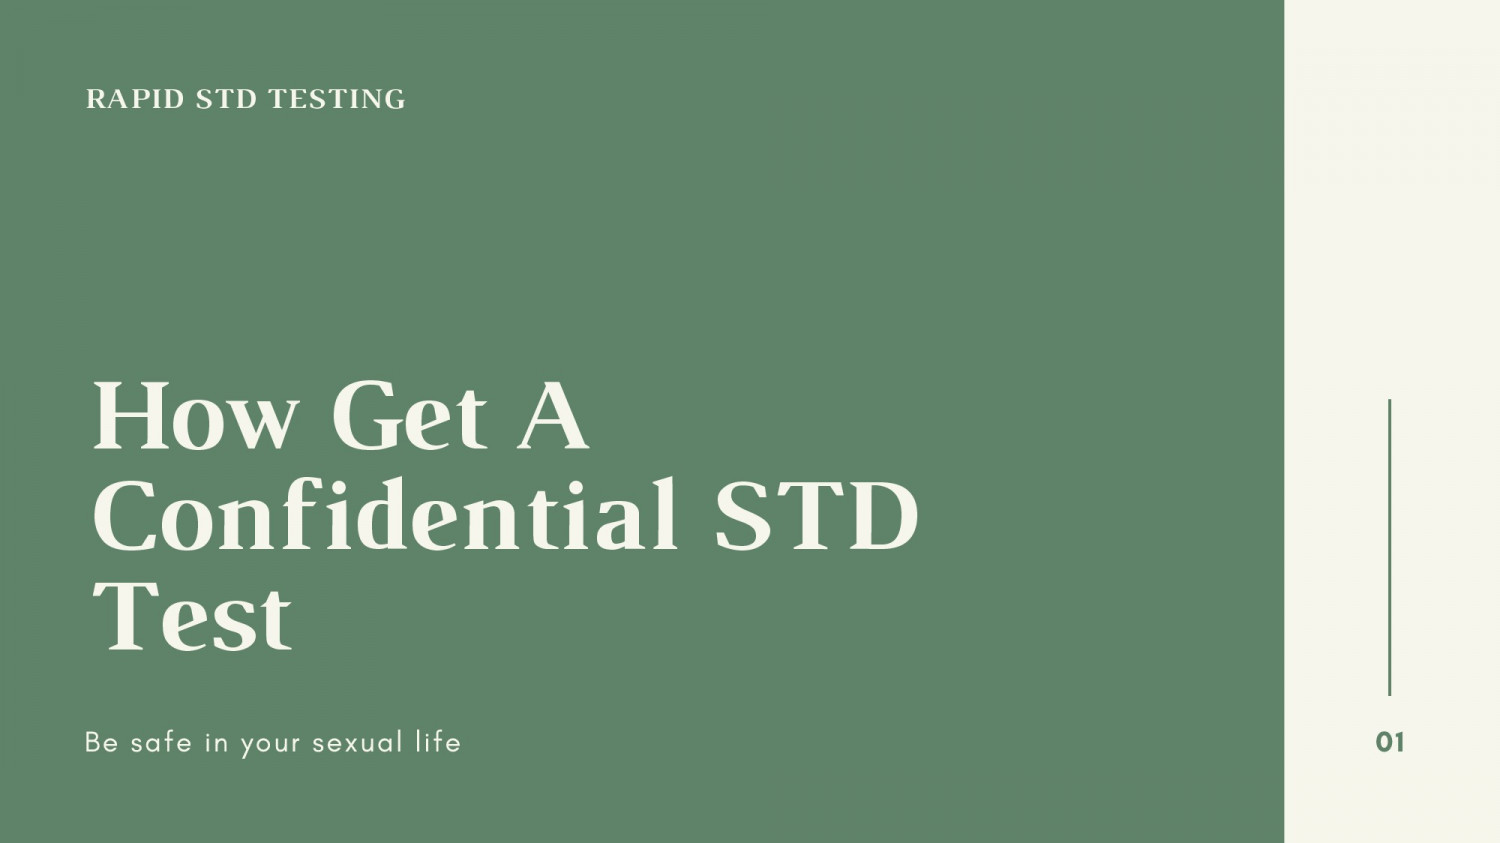 How to Get a Confidential STD Test - Guide For STD Test   Infographic